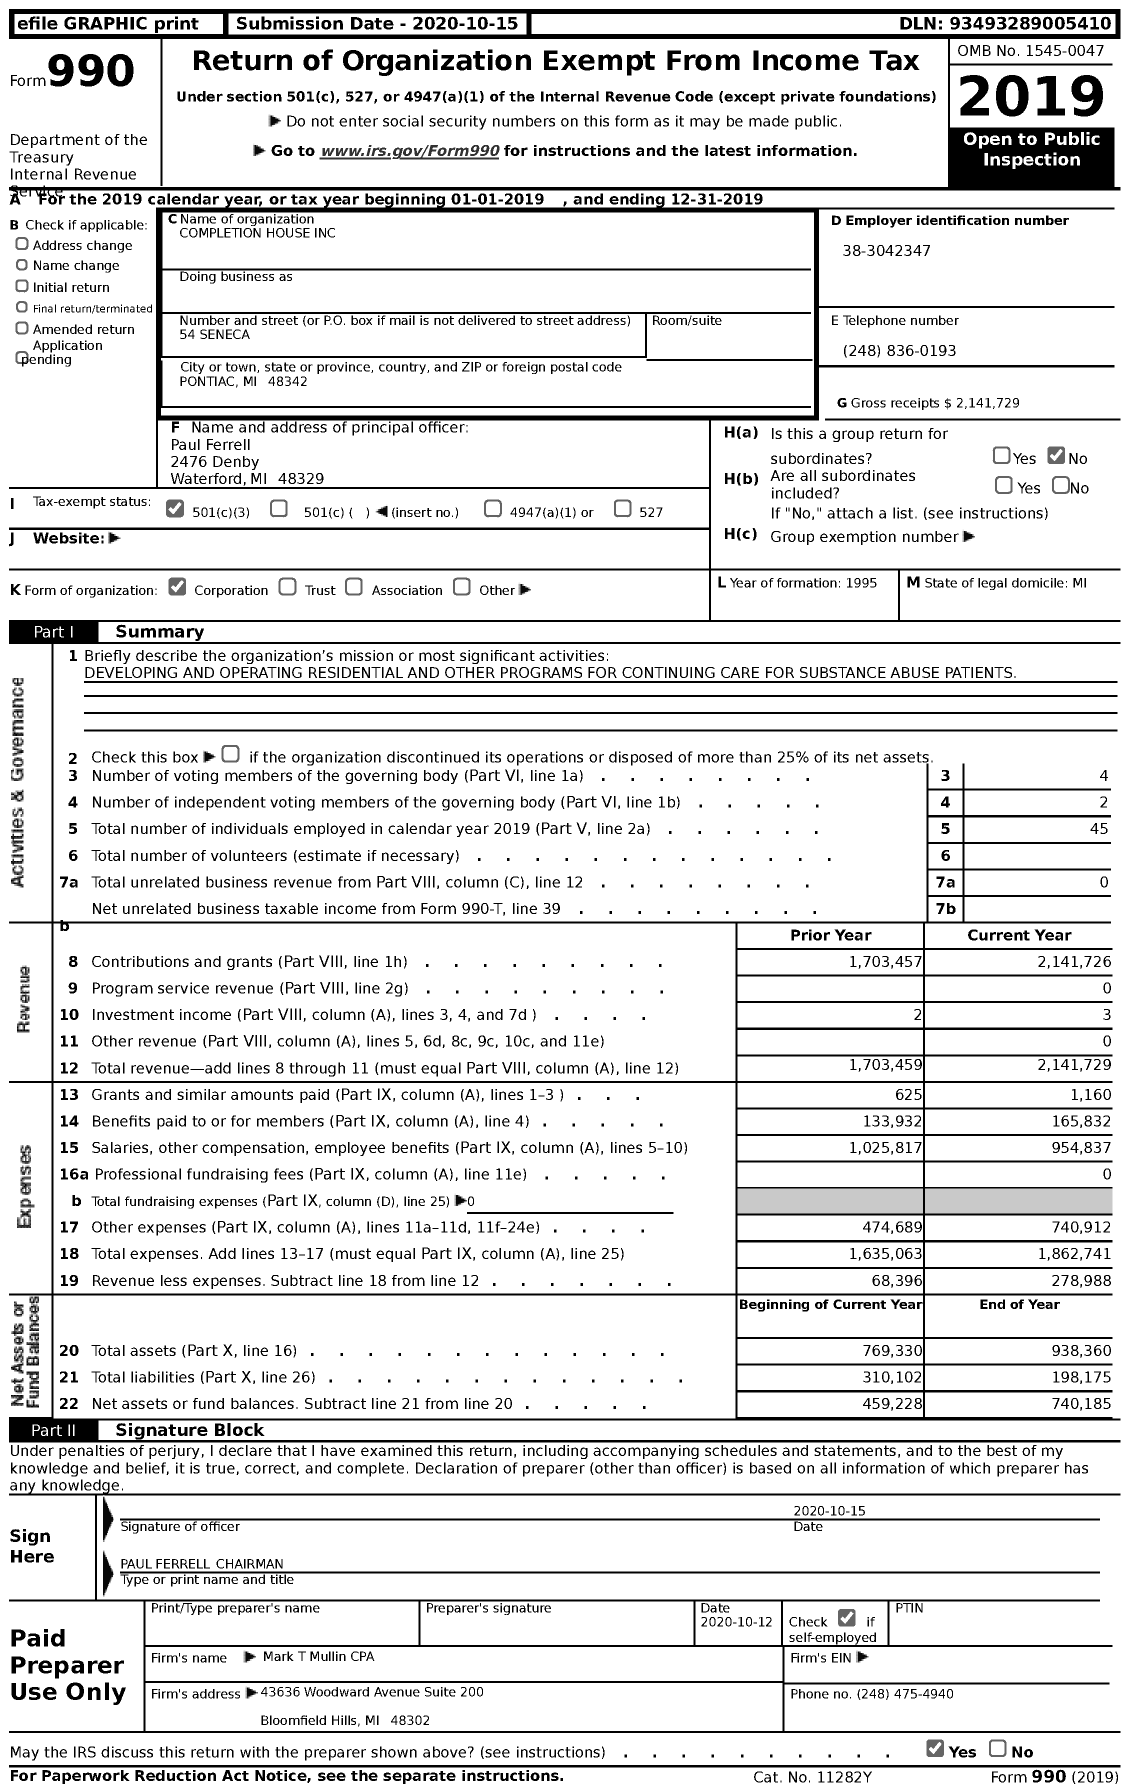 Image of first page of 2019 Form 990 for Completion House